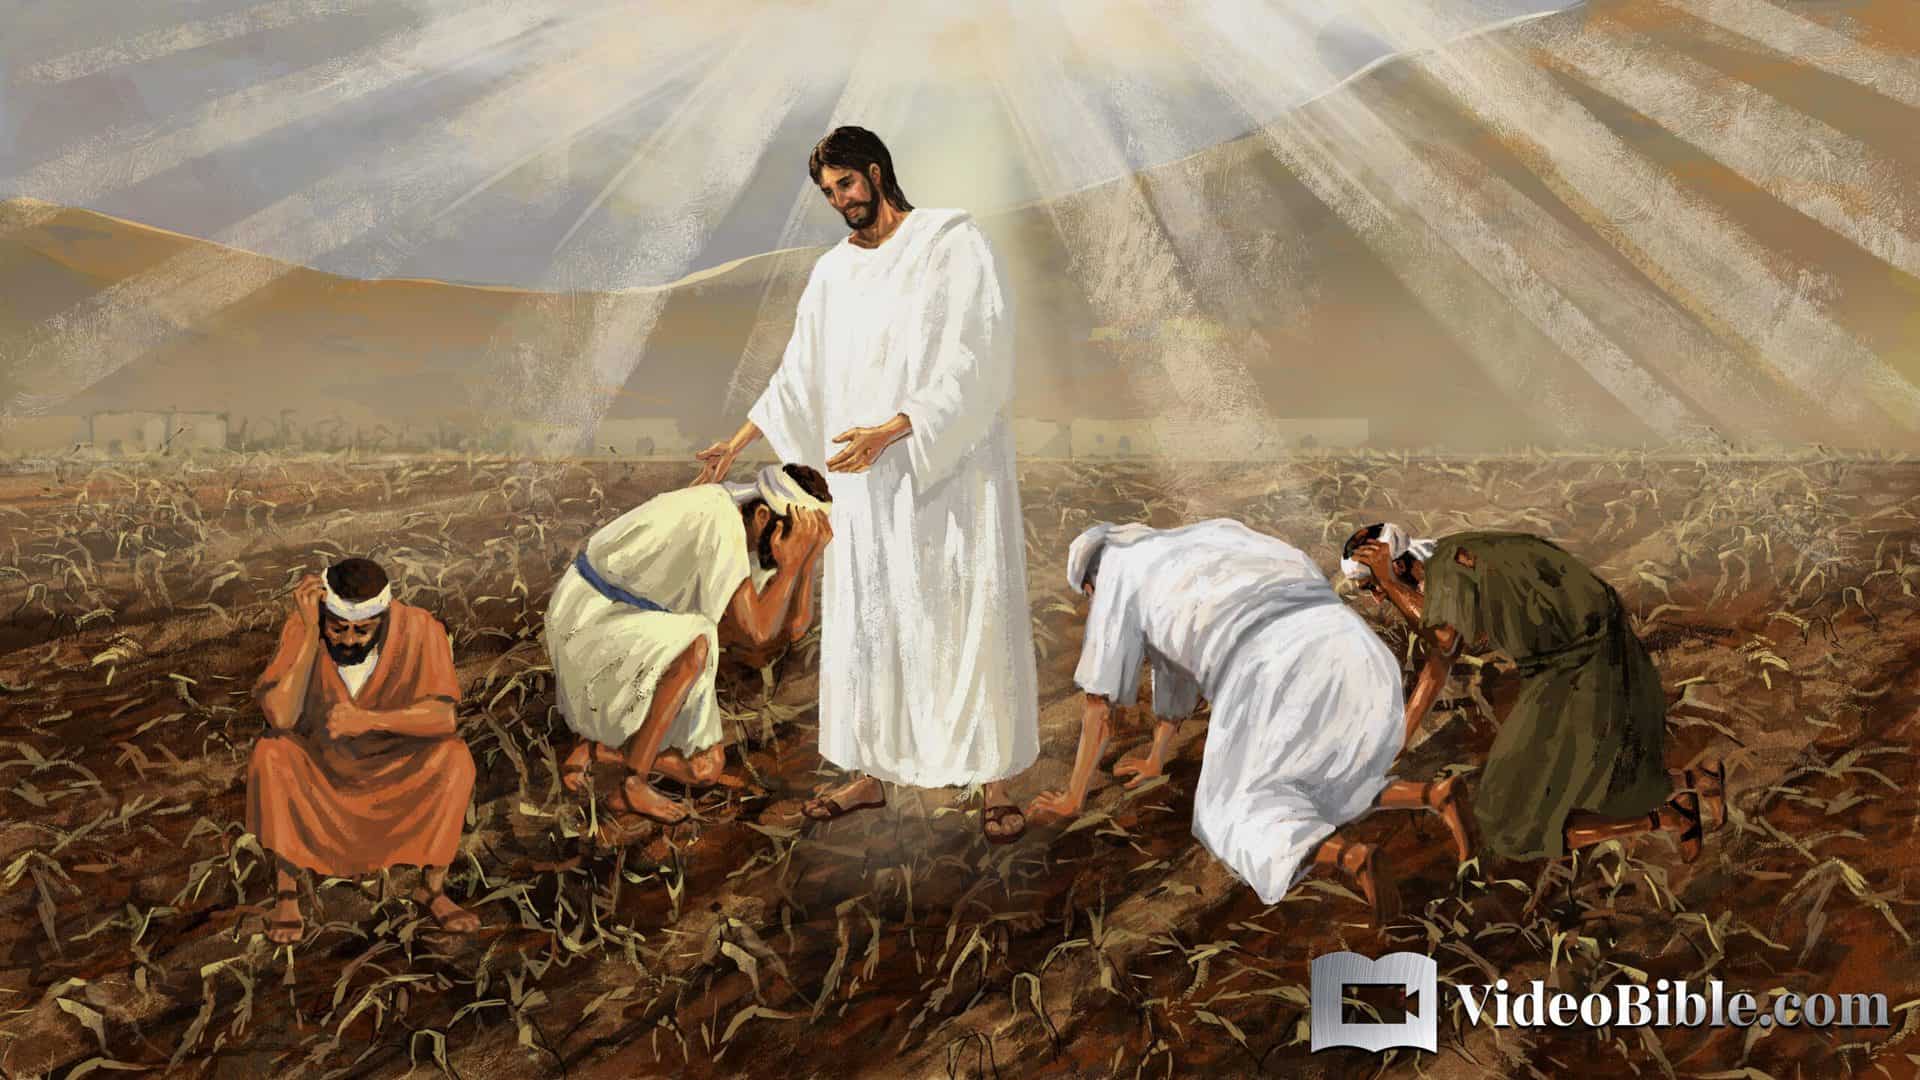 Jesus comforting farmers in a drought that lost their crop